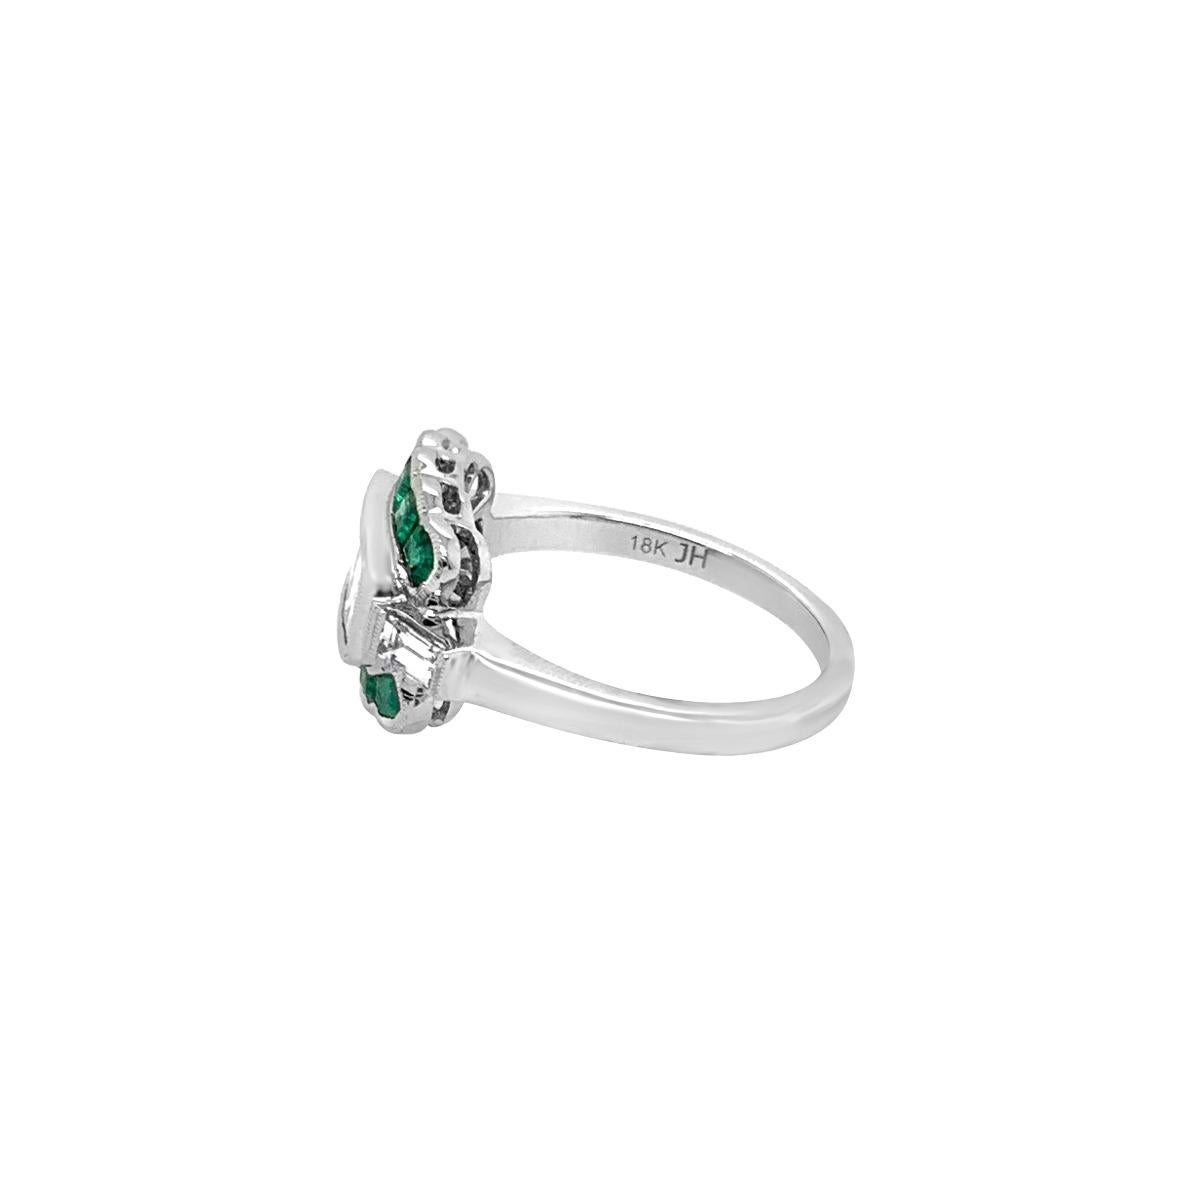 Art Deco at its best, using French calibre cut Precious Gemstones.

New World Technology meets Old World Styles!

Metal: 18k White Gold
Hallmark: 18k JH
Ring Size: 6.25
Gemstone: Emerald, Diamond
Emerald Weight: 1.10 CT
Diamond Weight: 0.85 CT
VR1049